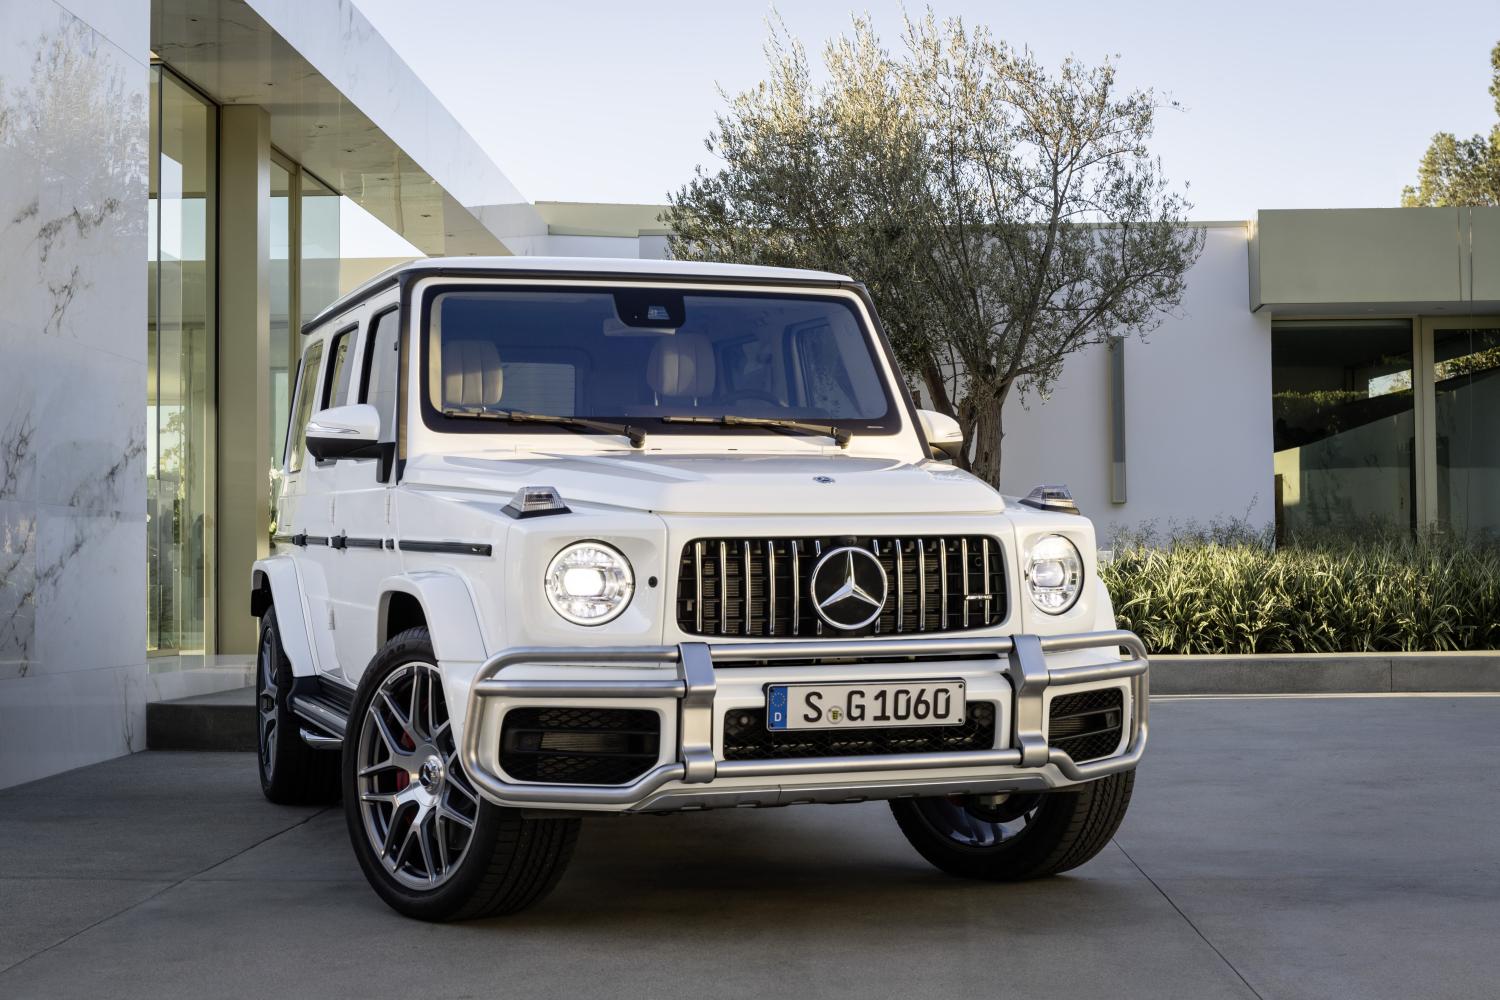 Take A Look At The Brutal New 4.0 Biturbo Mercedes-AMG G 63